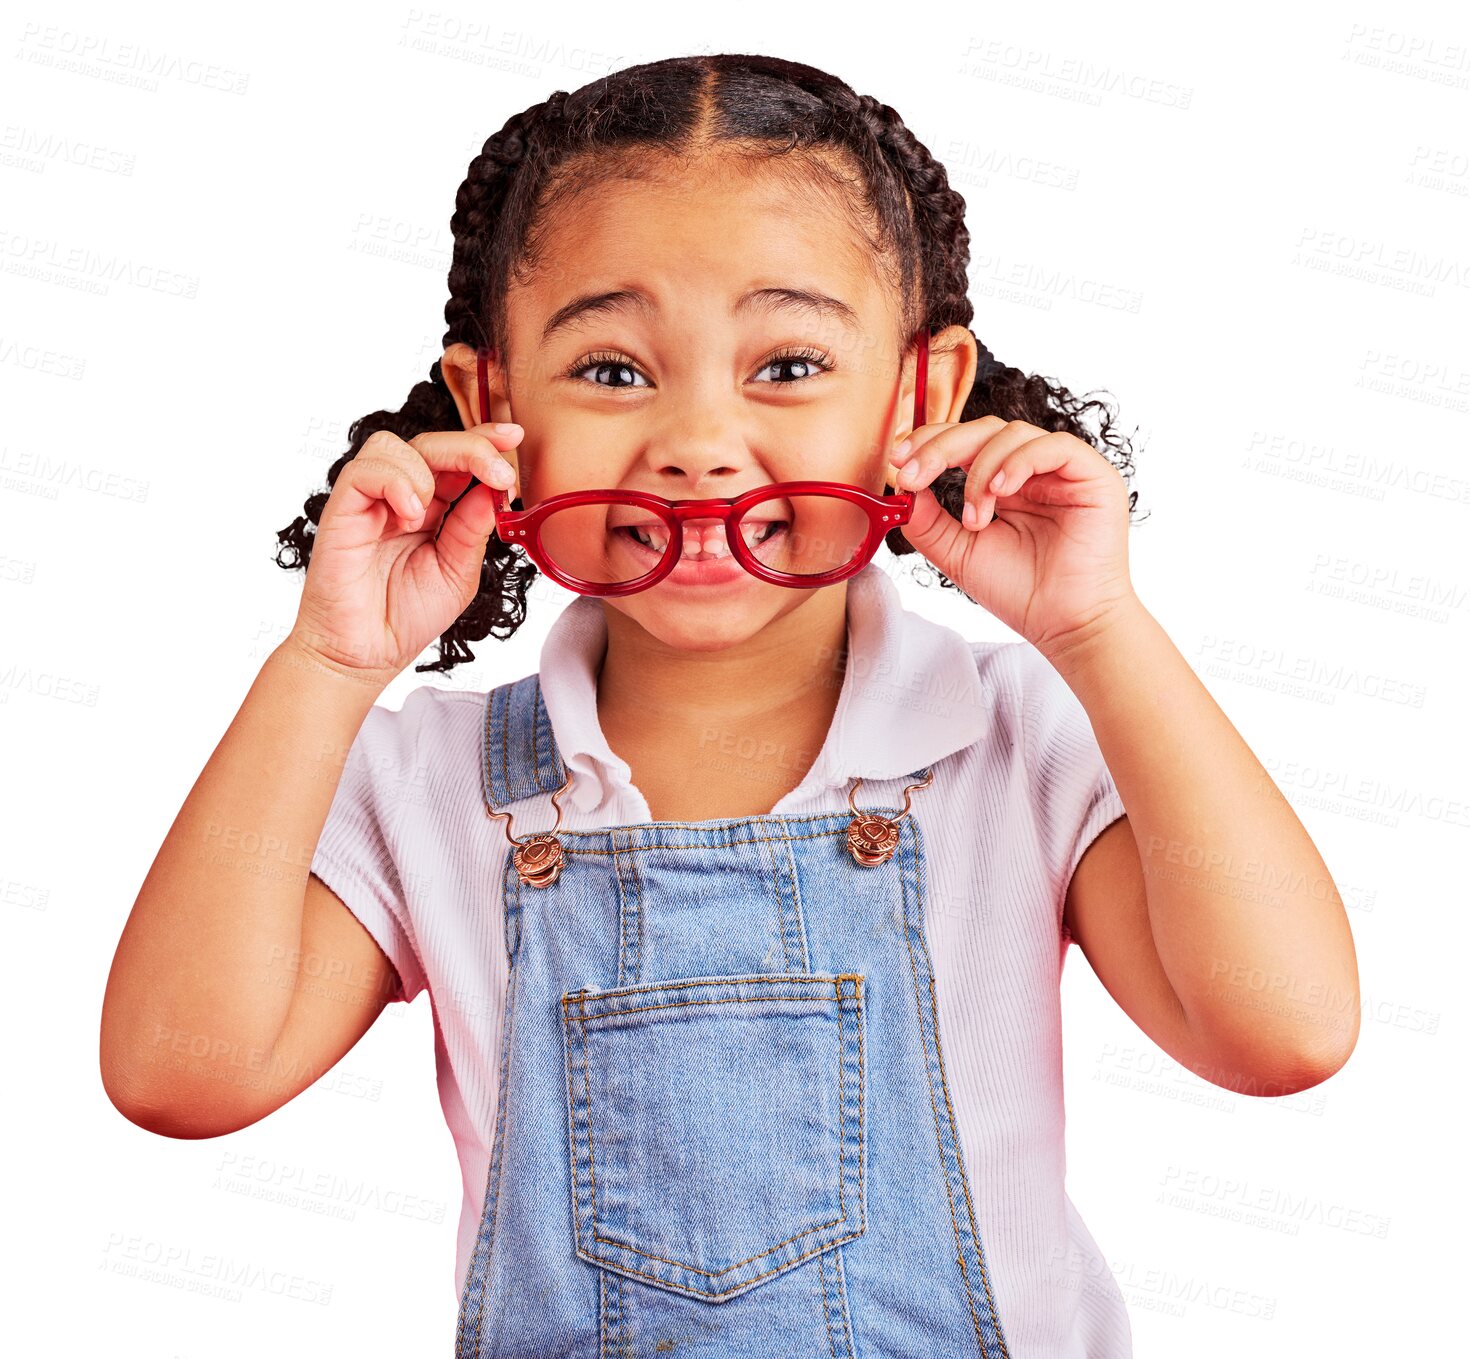 Buy stock photo Portrait, glasses and smile with a girl child isolated on a transparent background for vision. Medical, insurance and eyewear with a happy young female kid on PNG for prescription frame lenses